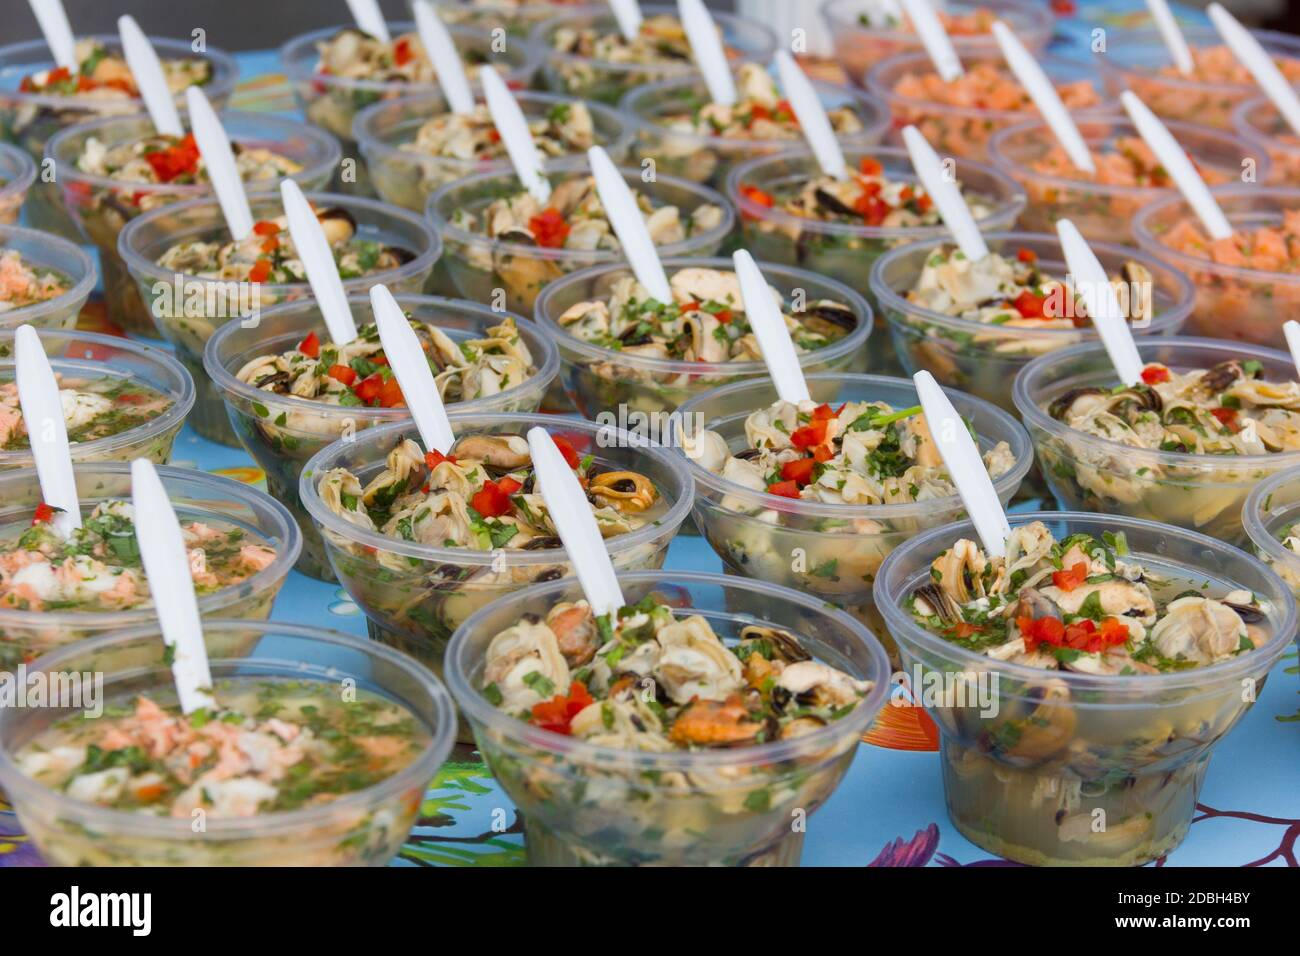 Display of different variety of ceviche in plastic glasses perfectly lined up with white spoons at Angelmo Bay market in Puerto Montt, Chile Stock Photo